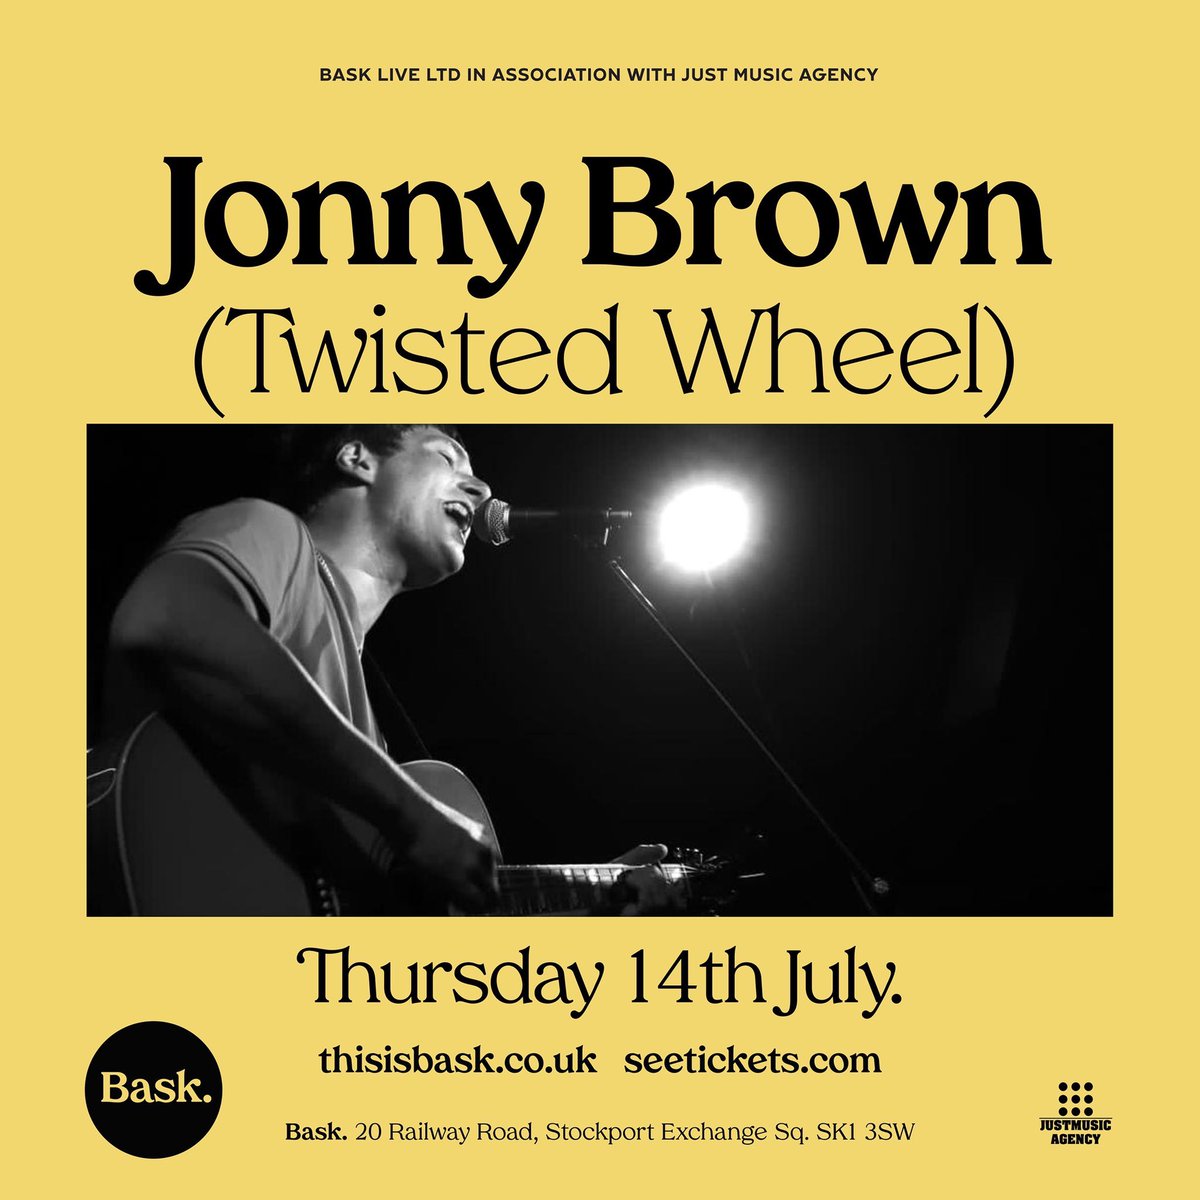 Come On Stockport let’s get this show Sold Out. @twisted_wheel front man @jonnybrownltd headlines @thisisbask which is located right outside Stockport Train Station so great transport links. Top Night in the making. Tickets on sale now seetickets.com/event/jonny-br…